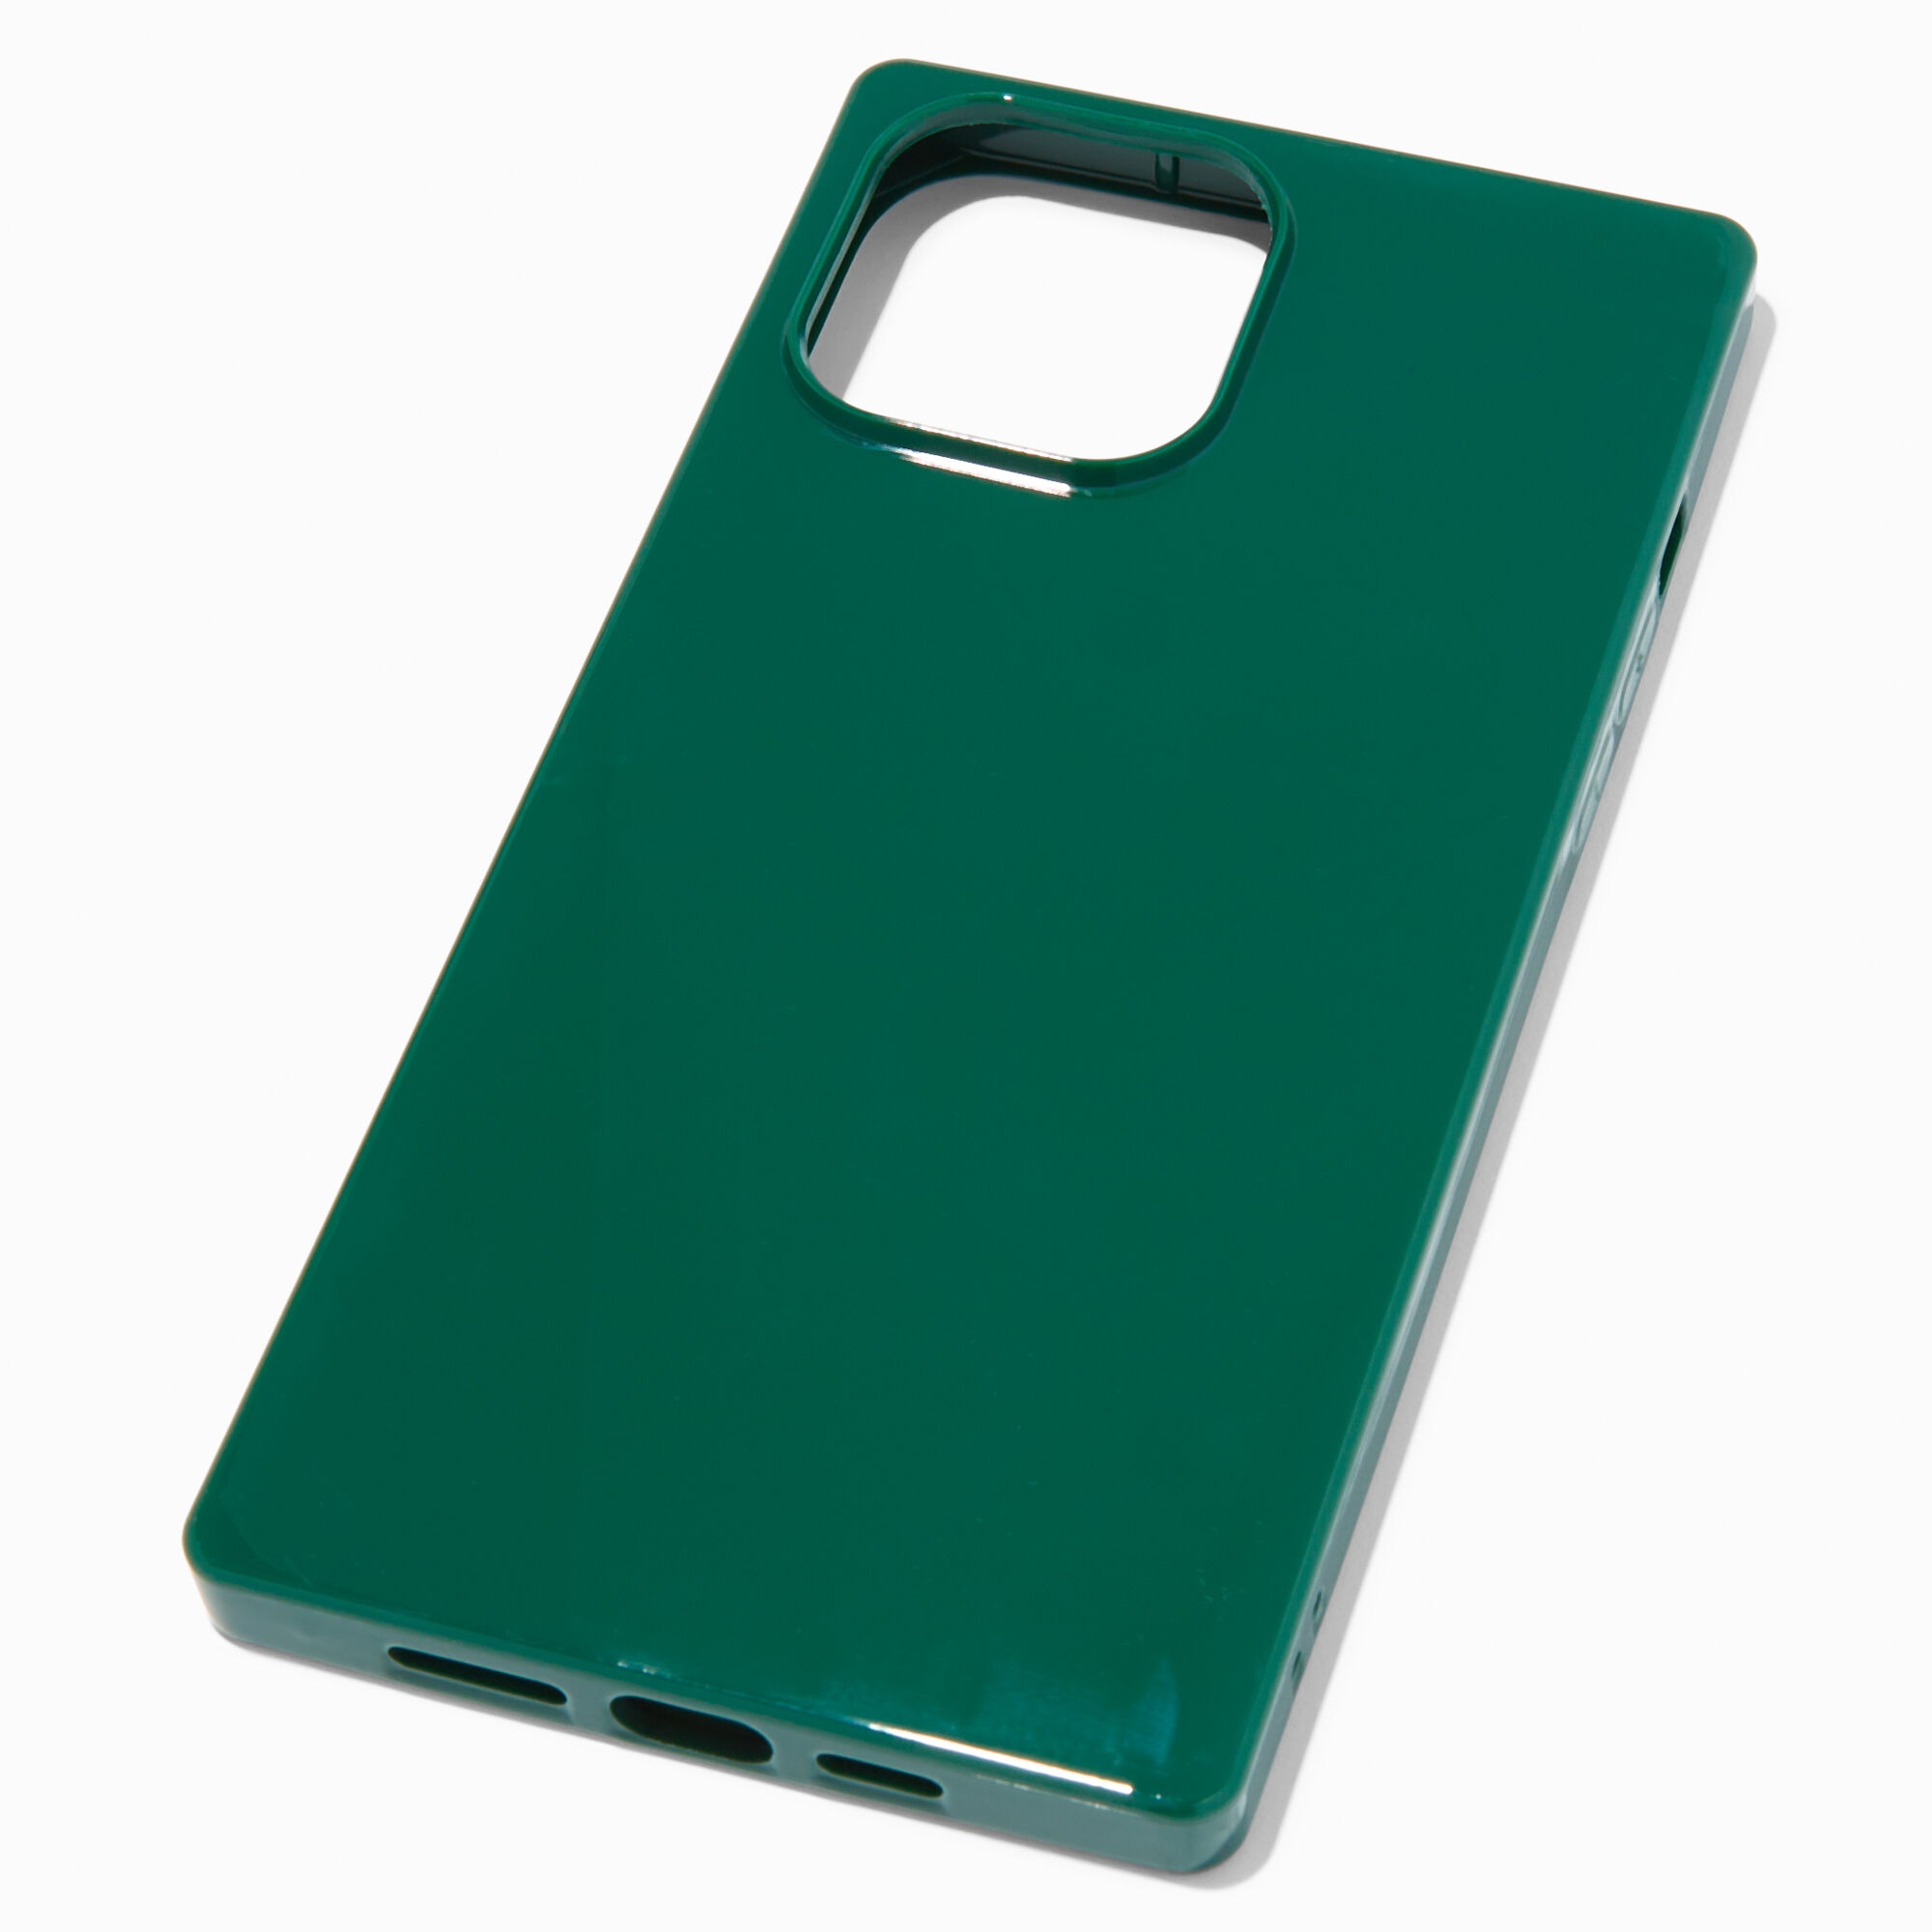 View Claires Shiny Emerald Protective Phone Case Fits Iphone 13 Pro Max Green information